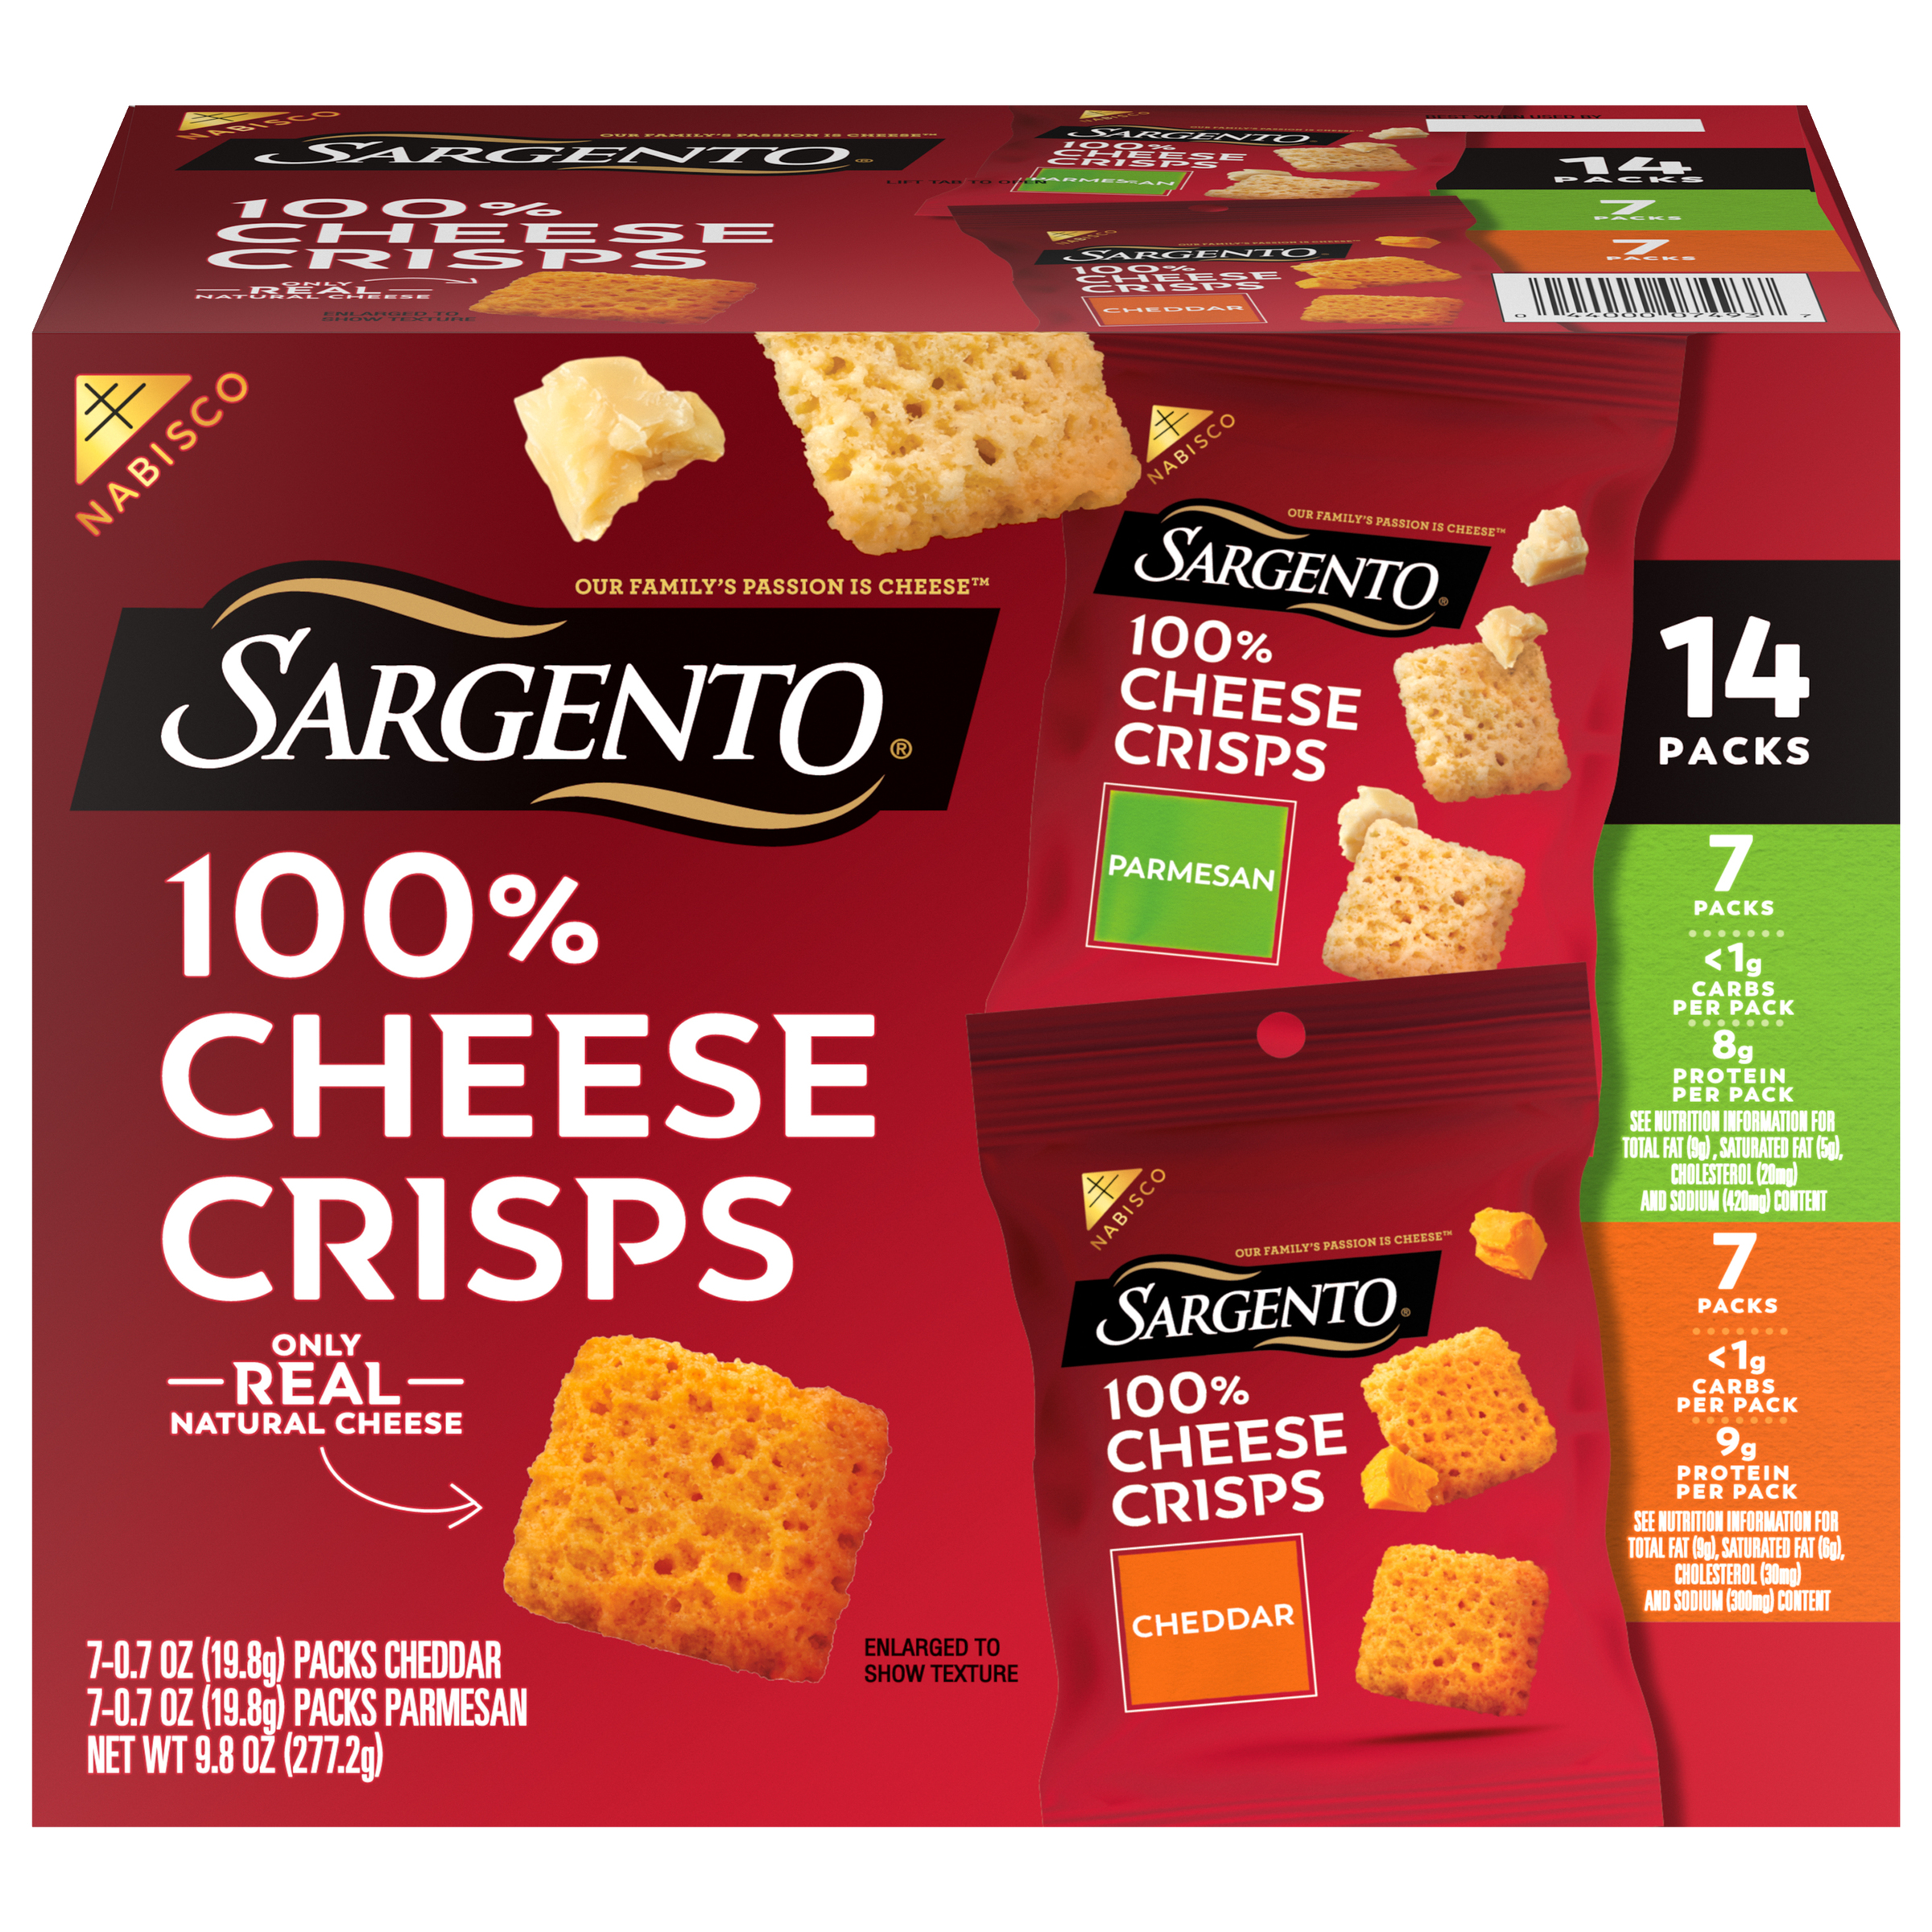 SARGENTO 100 % Cheese Crisps Variety Crackers 0.61 LB